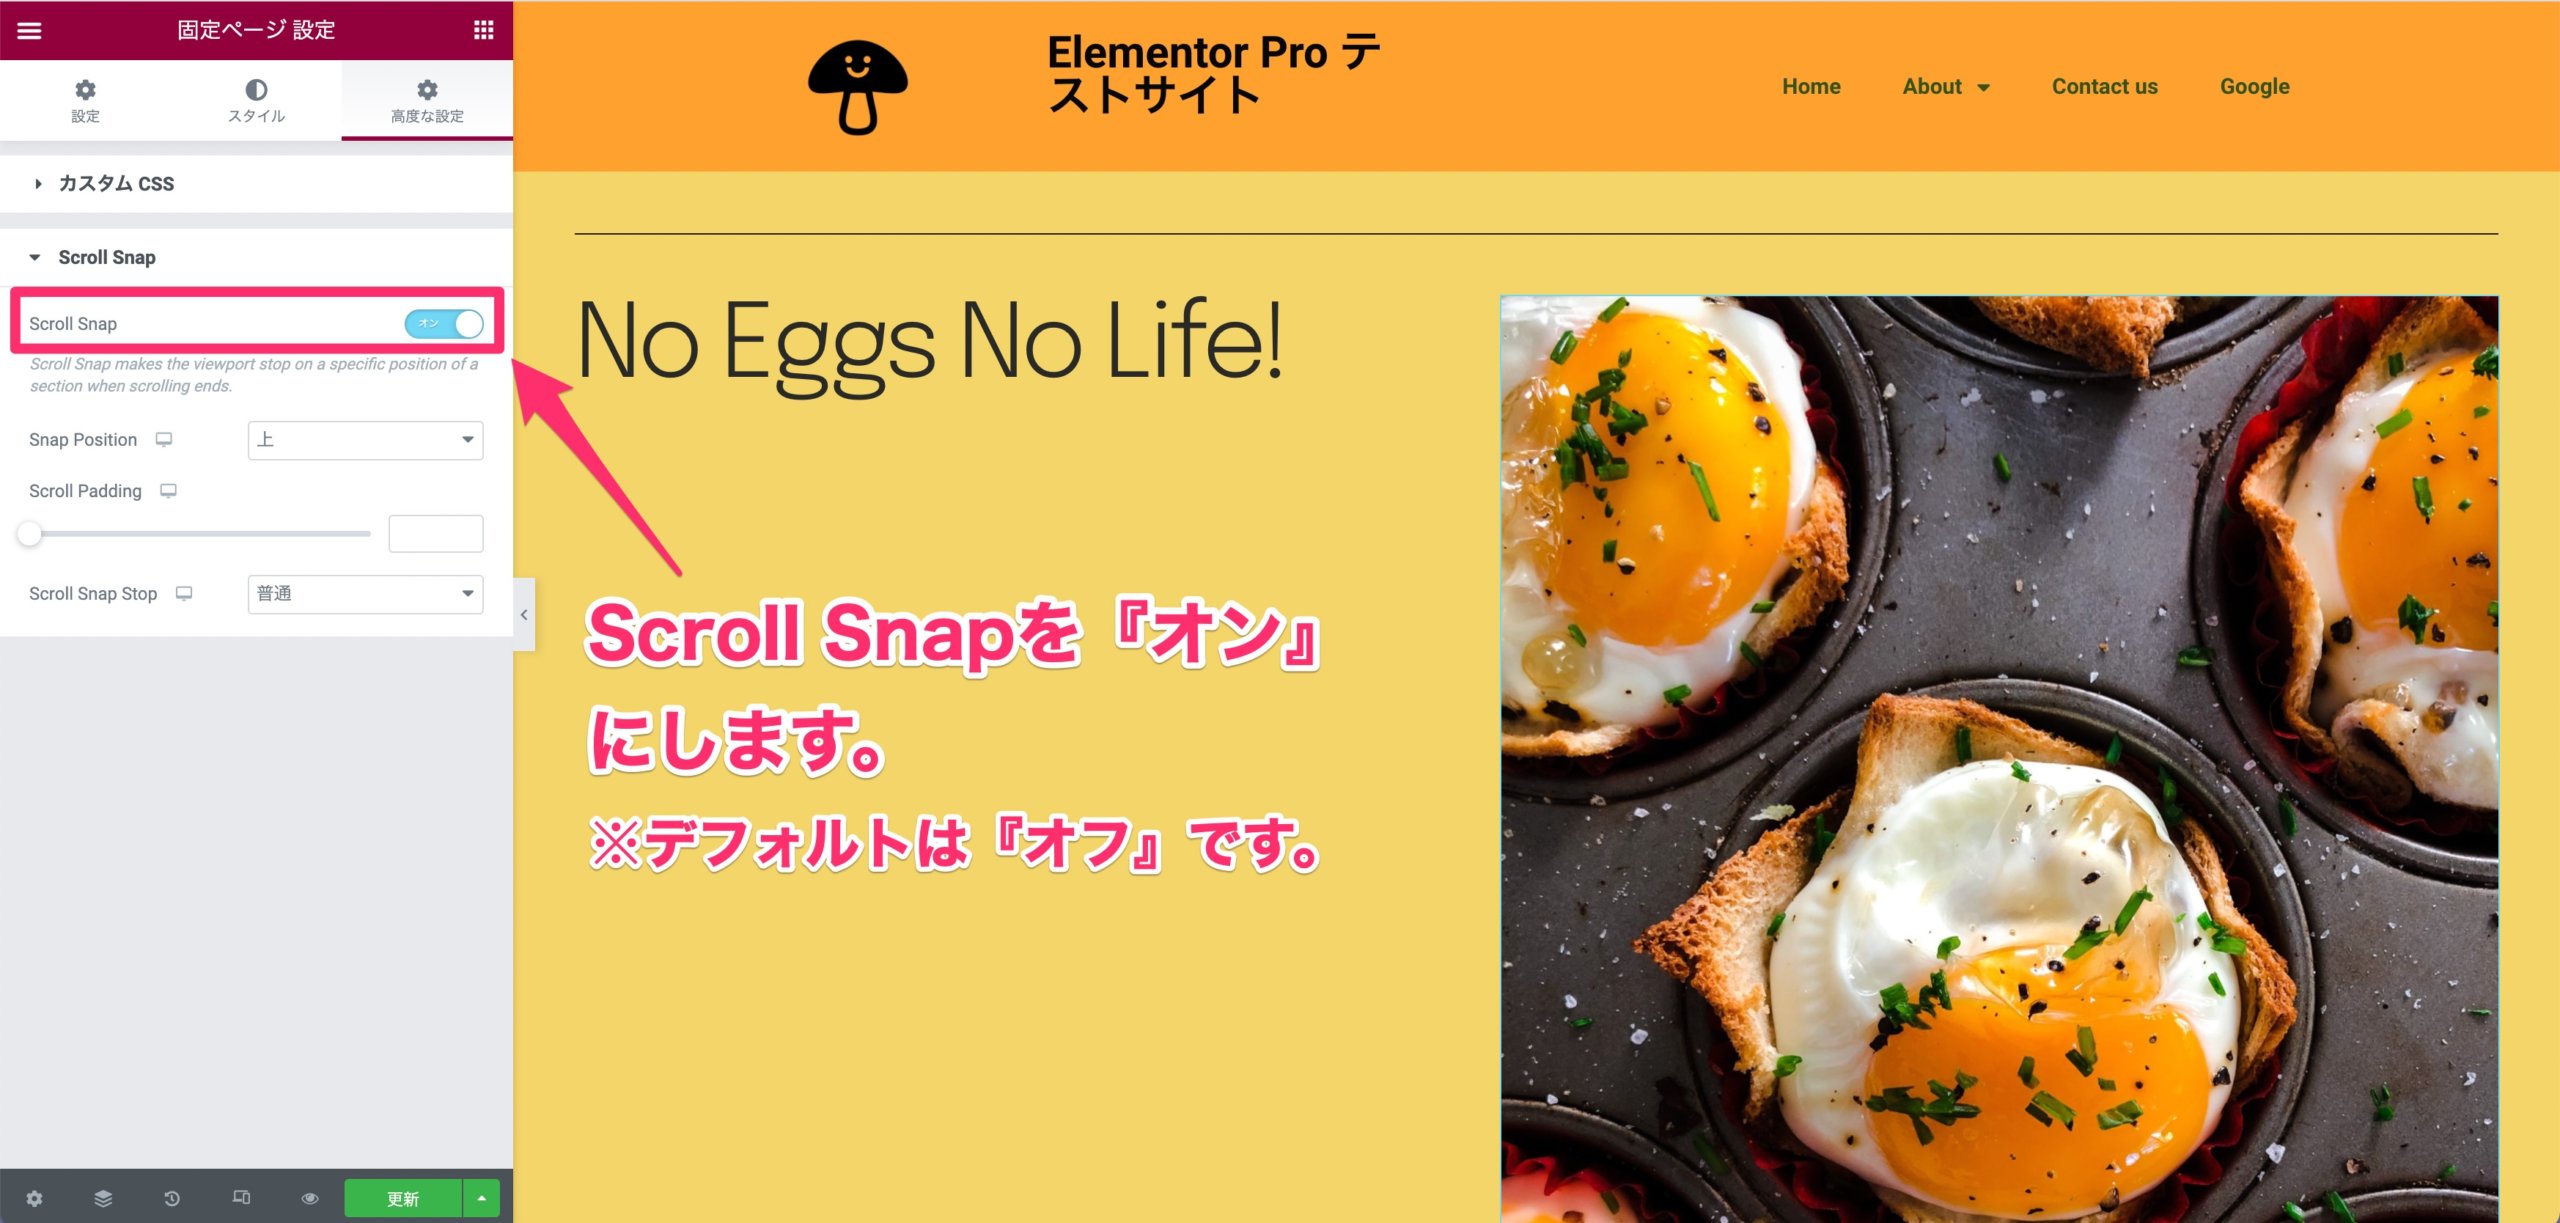 『Scroll Snap』を『オン』にしたときの表示画面